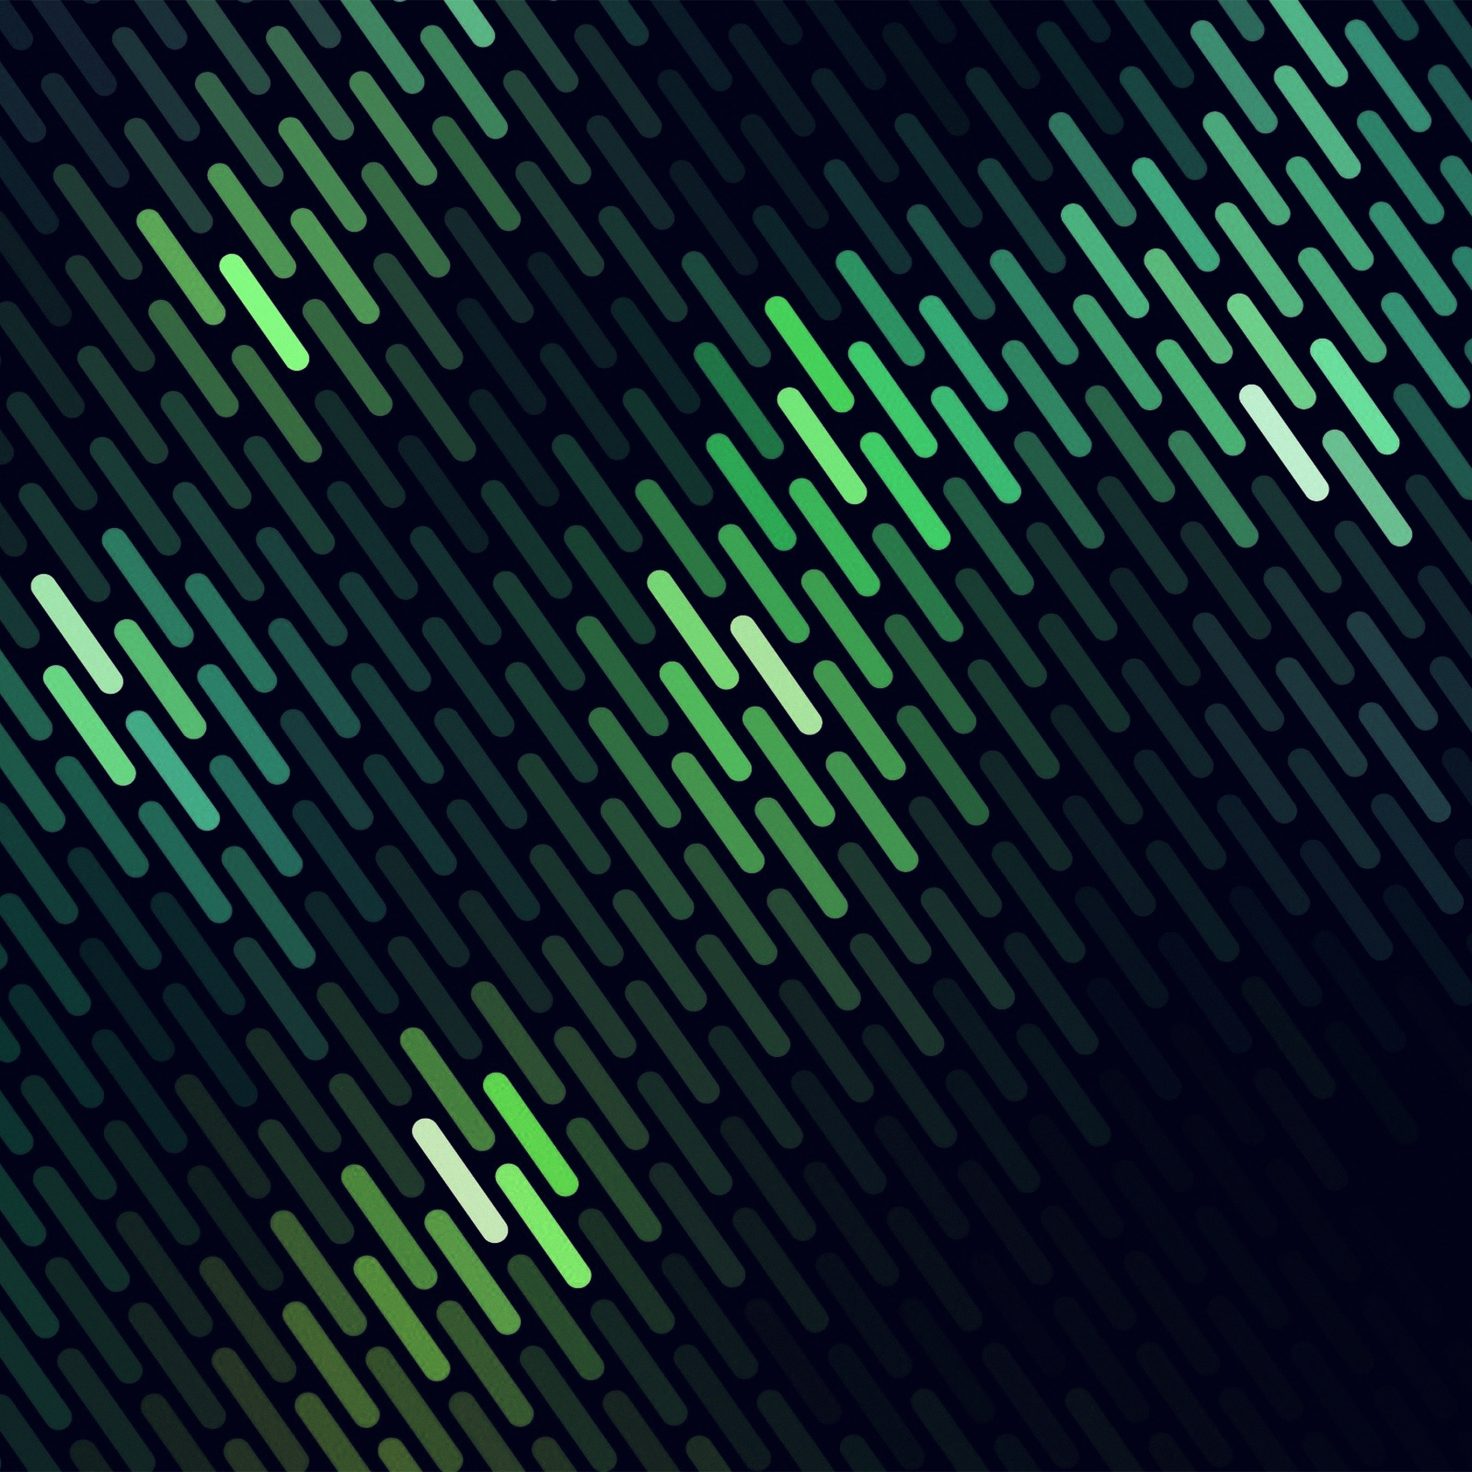 abstract-green-dots-lines-pattern-ipad-pro-1472×1472